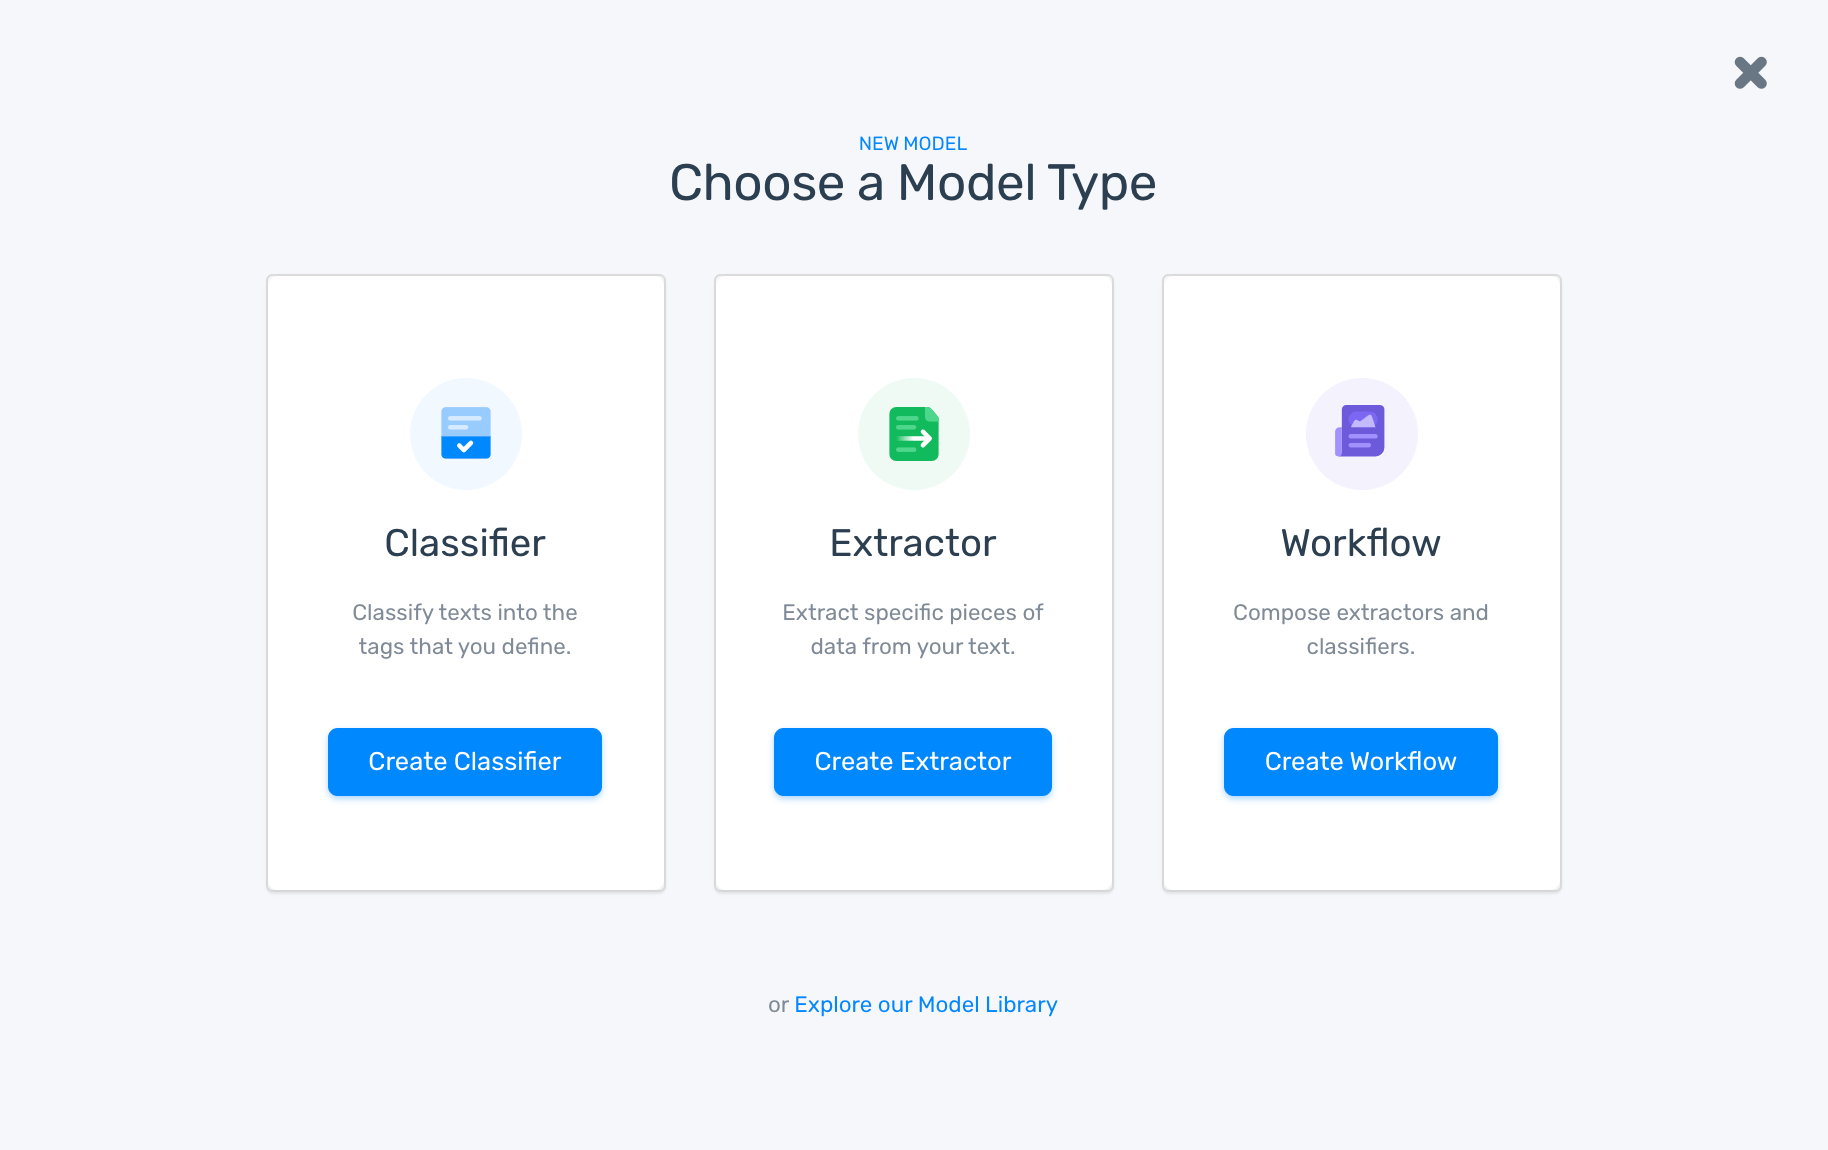 The option to choose a model type: Classifier, Extractor, or Workflow.